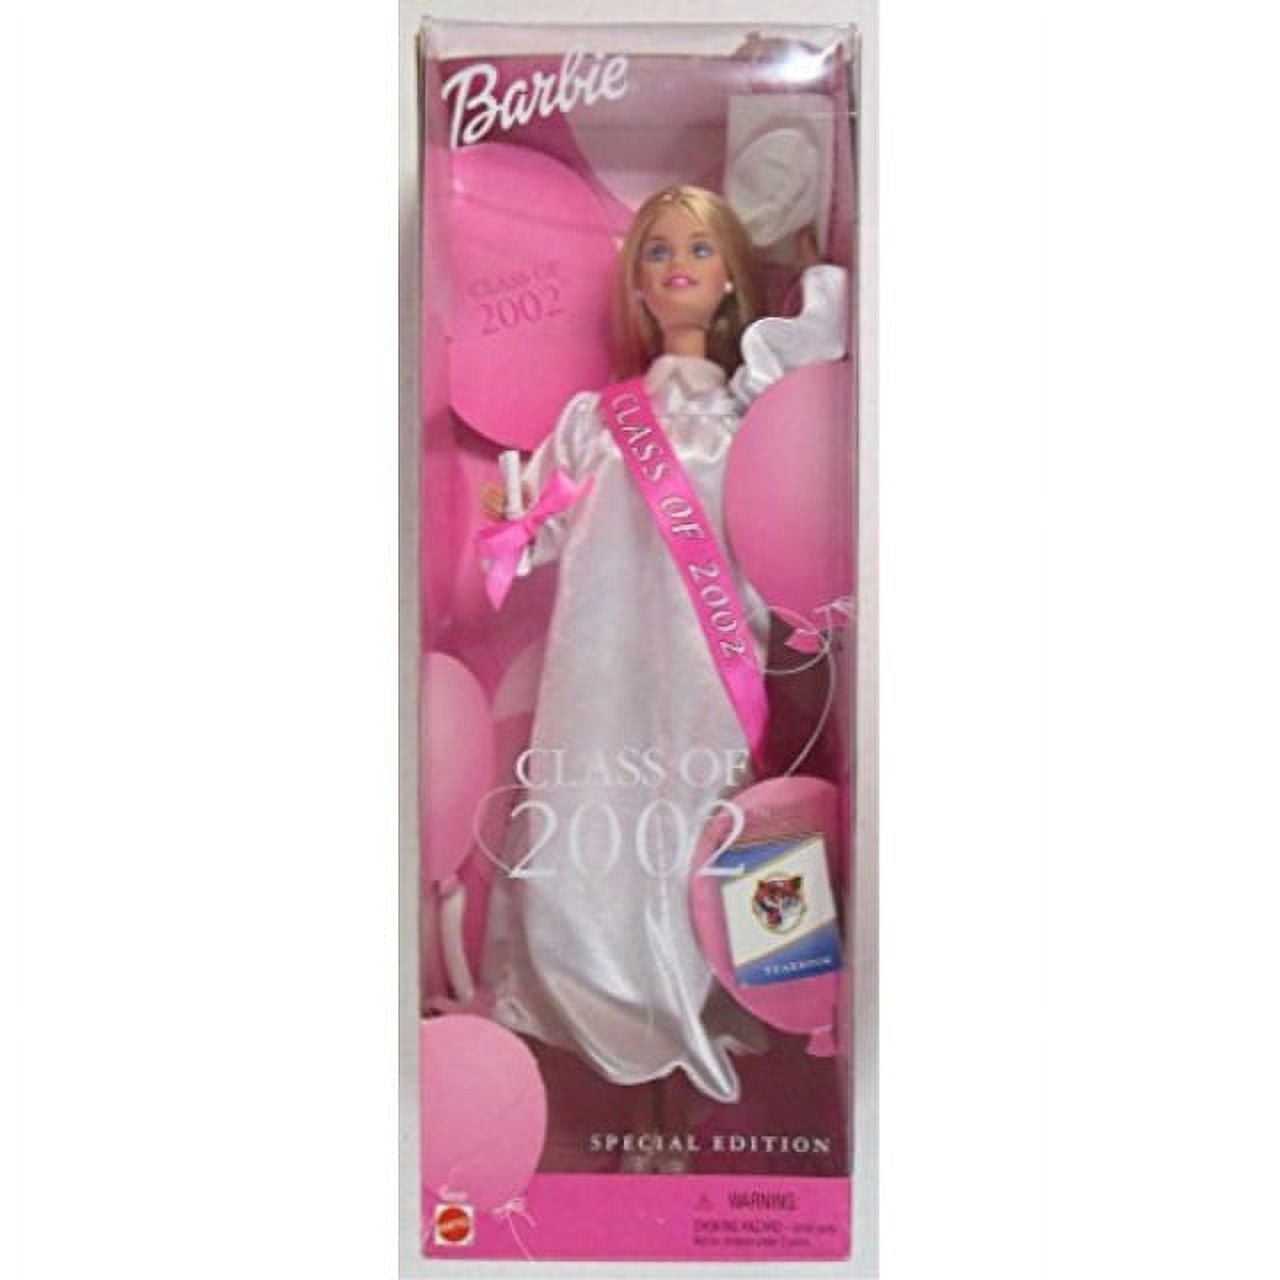 Barbie Class of 2002 Doll Special Edition (2001)